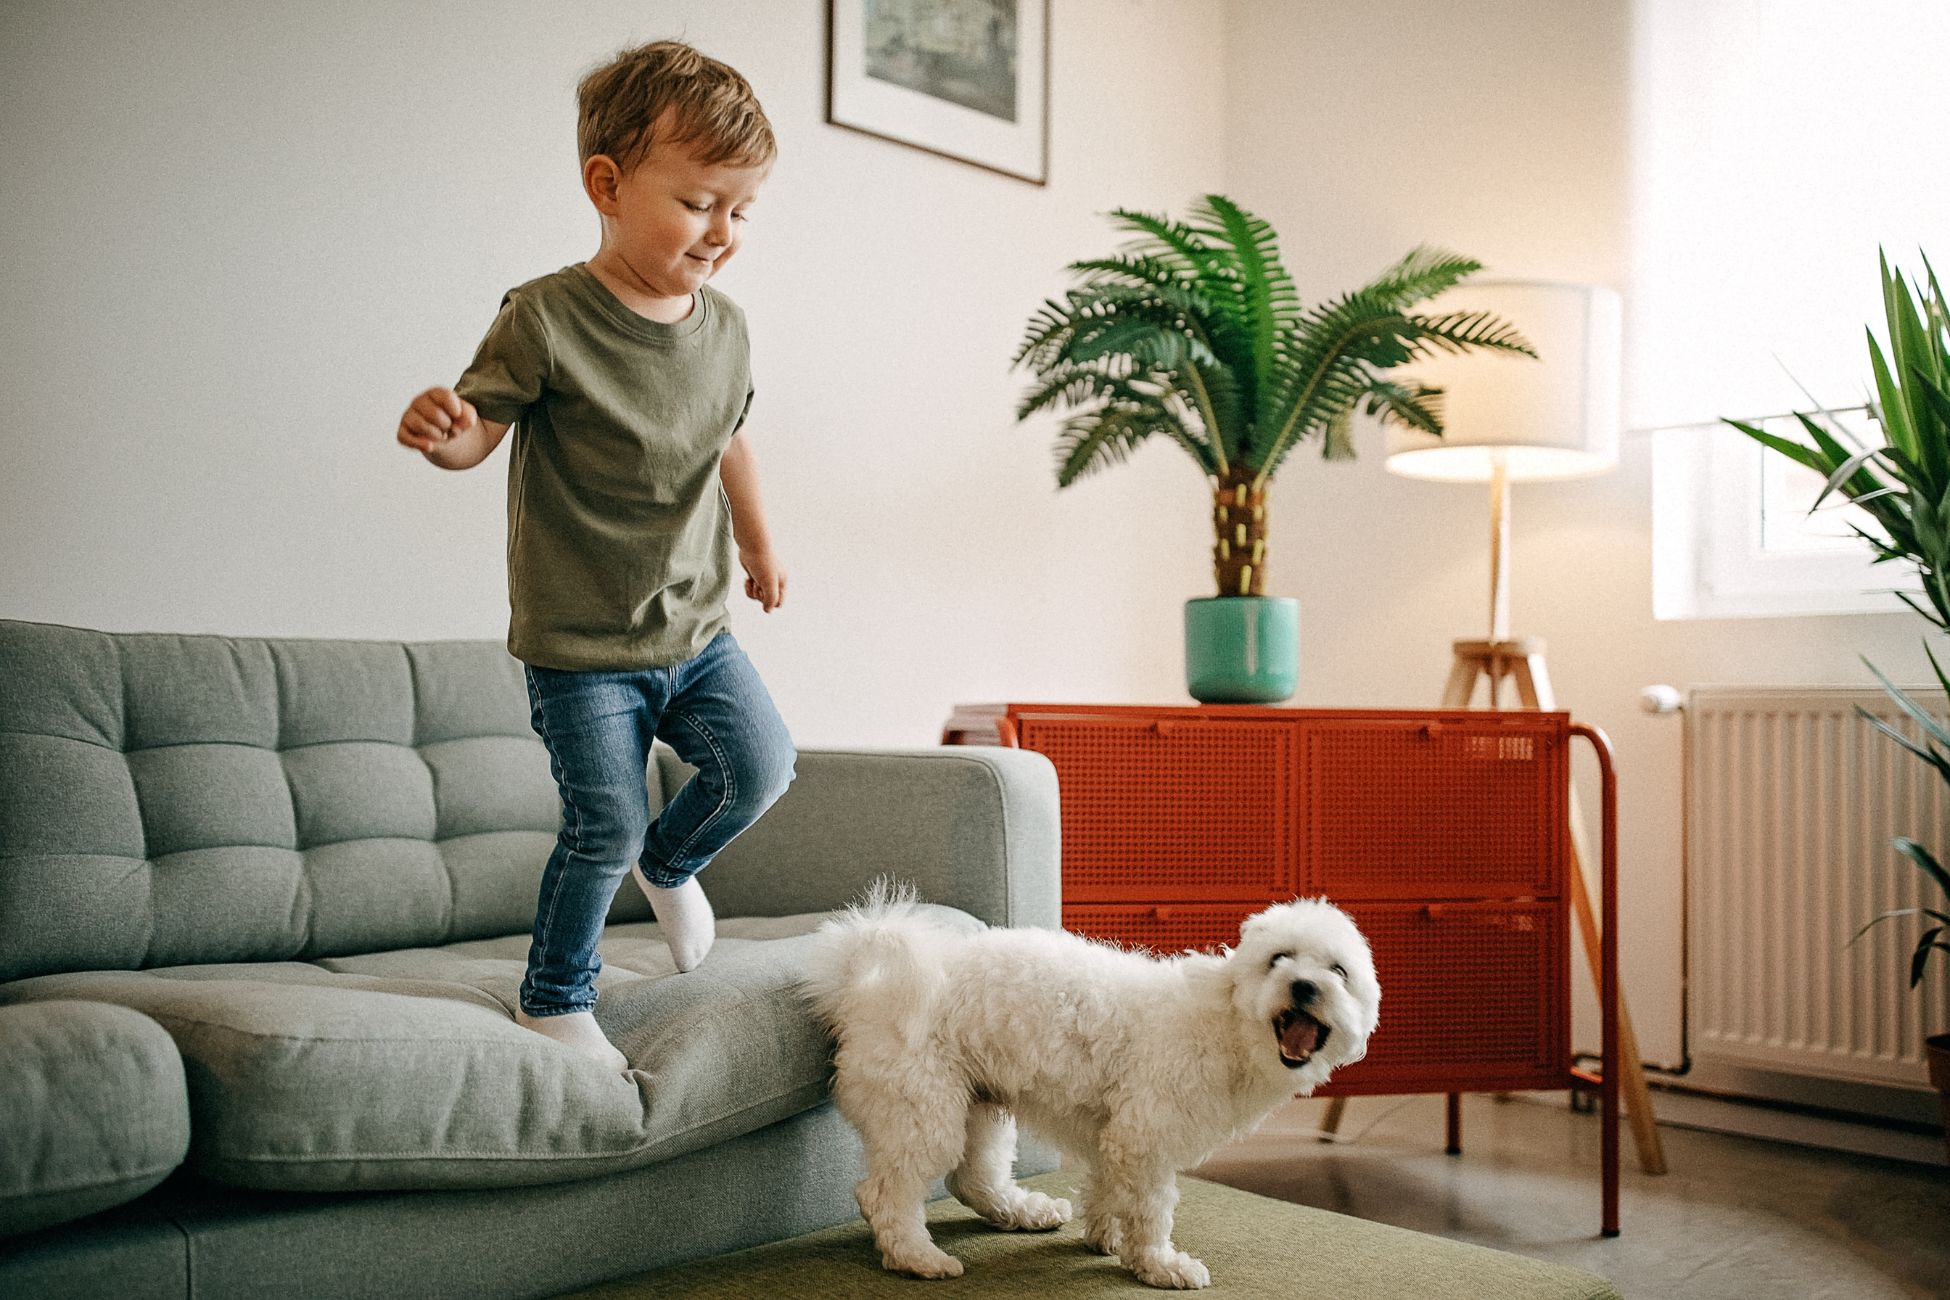 A kid and his pet dog playing in living room